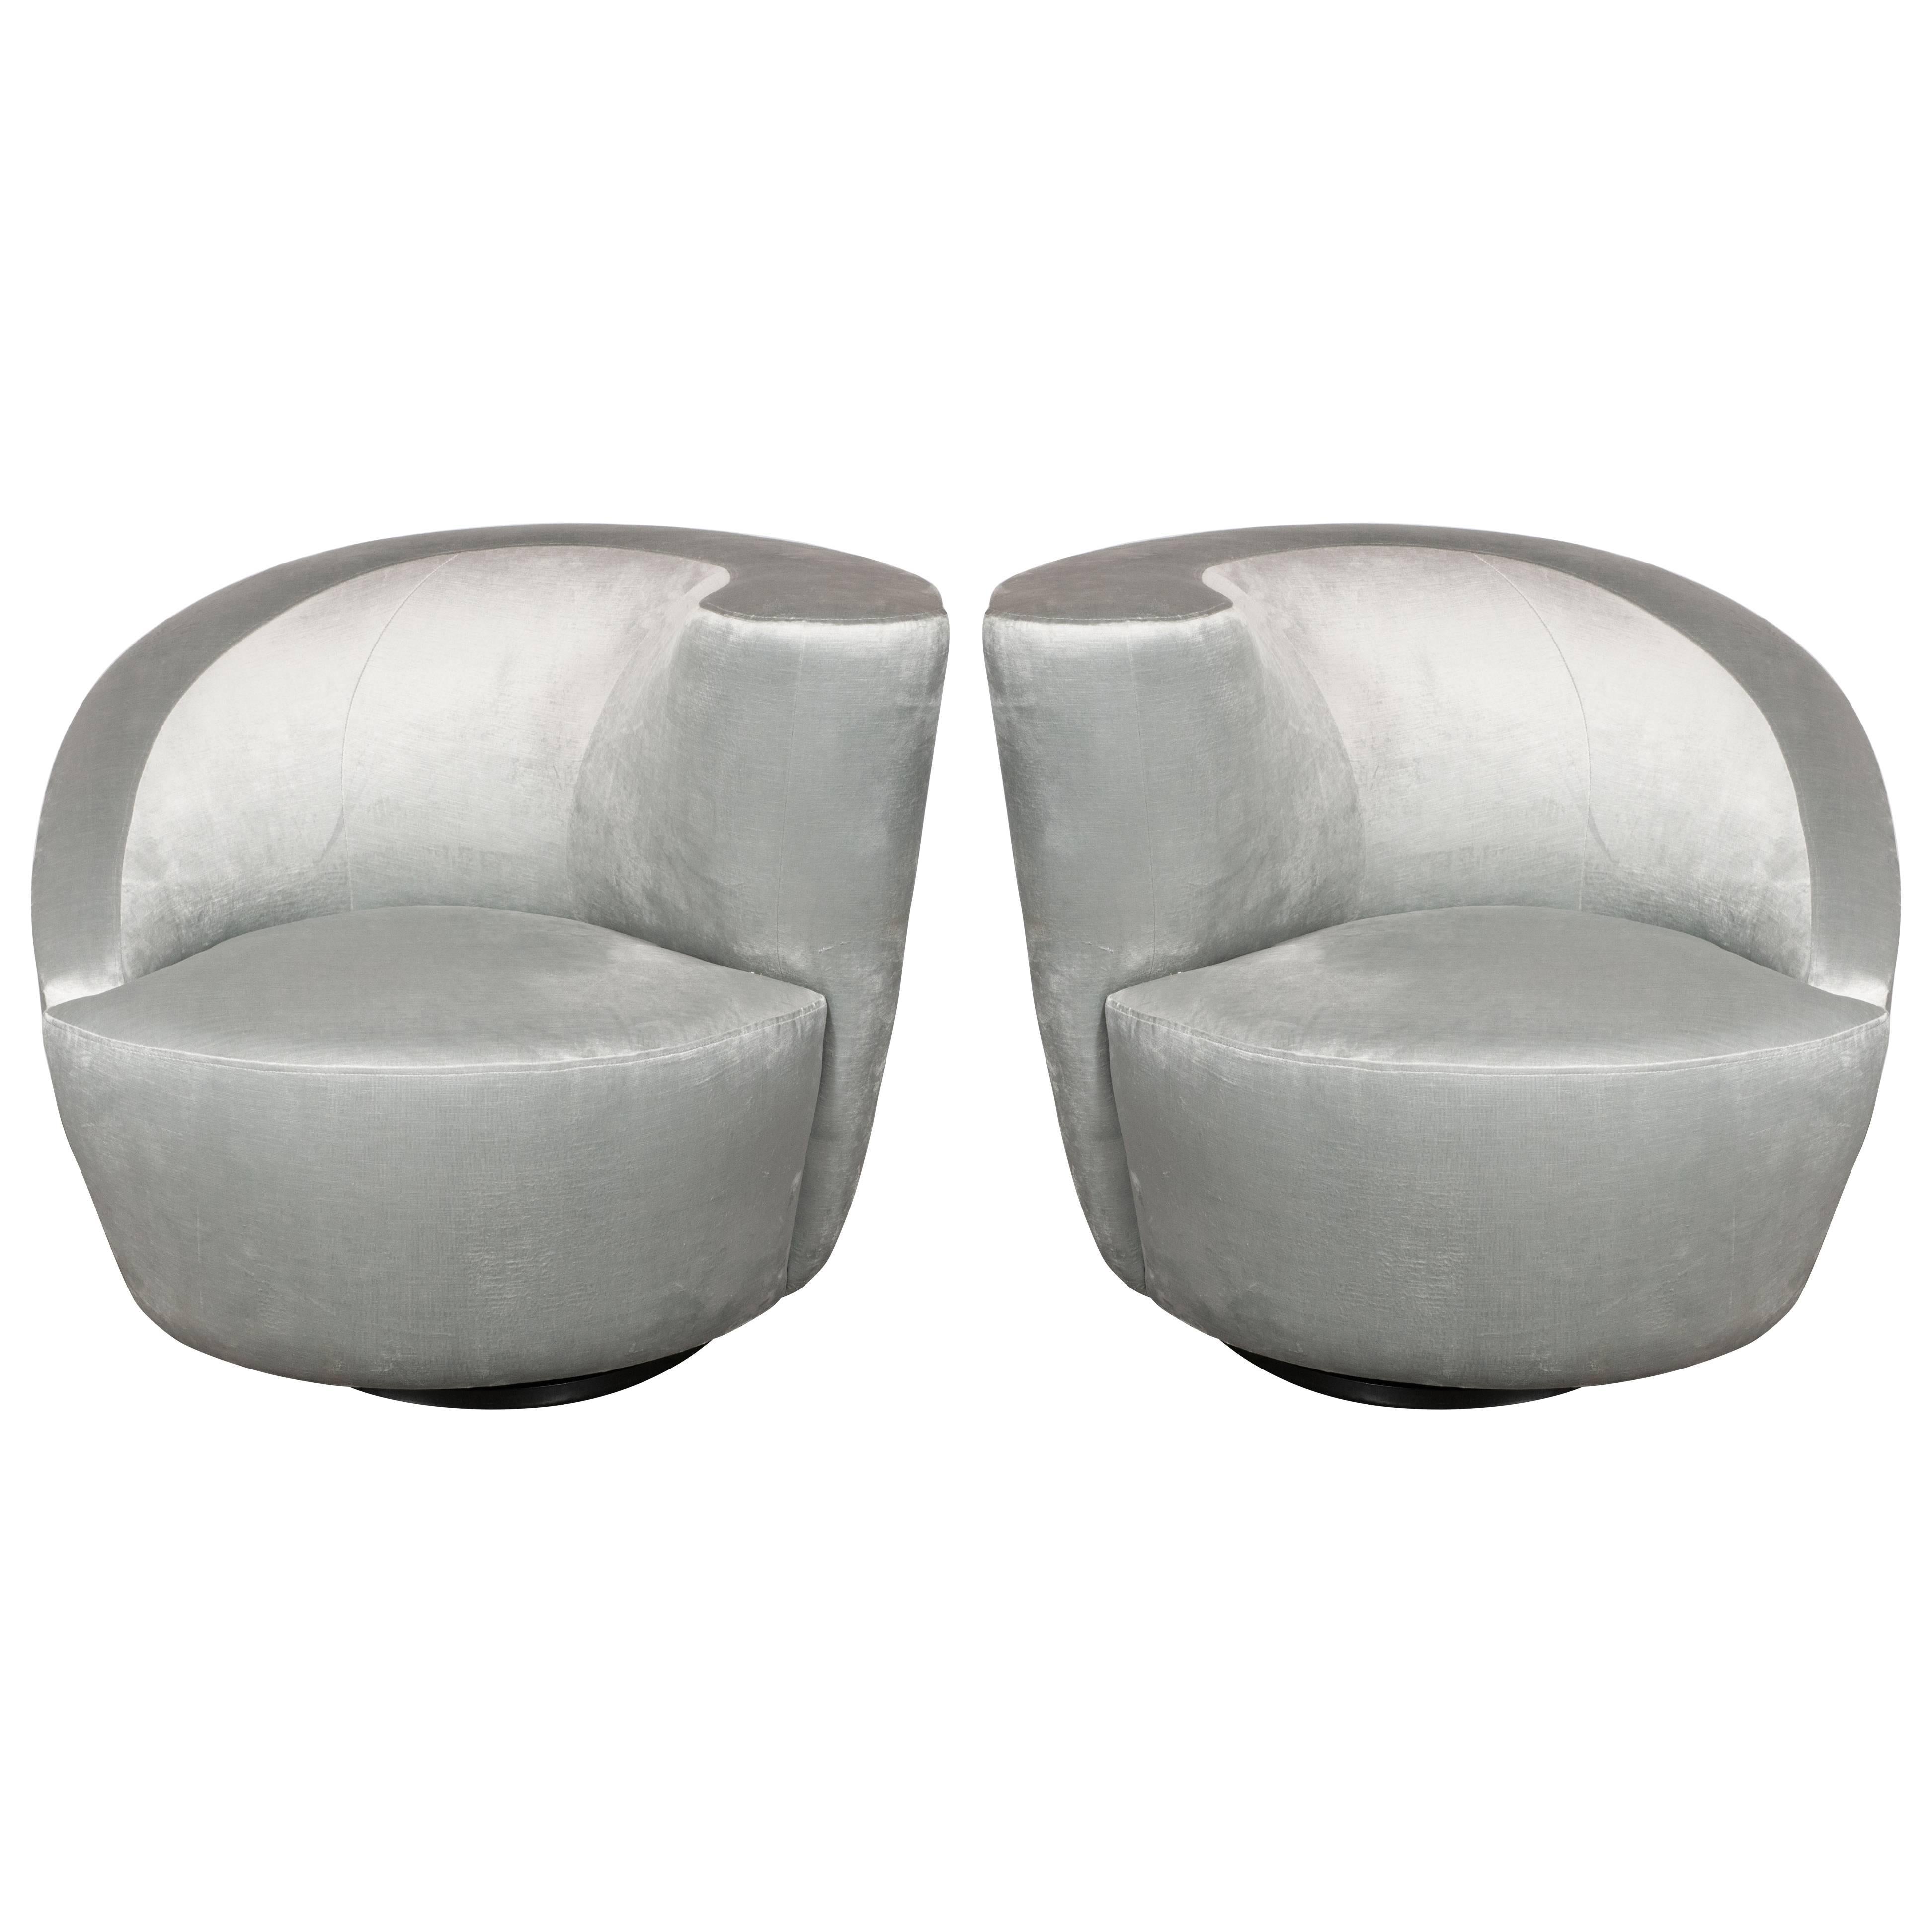 This pair of Nautilus chairs exemplify the stunning organic futurist forms and clean lines for which Vladimir Kagan one of the most esteemed furniture designers of the 20th century is celebrated. The chairs' form suggests an abstracted